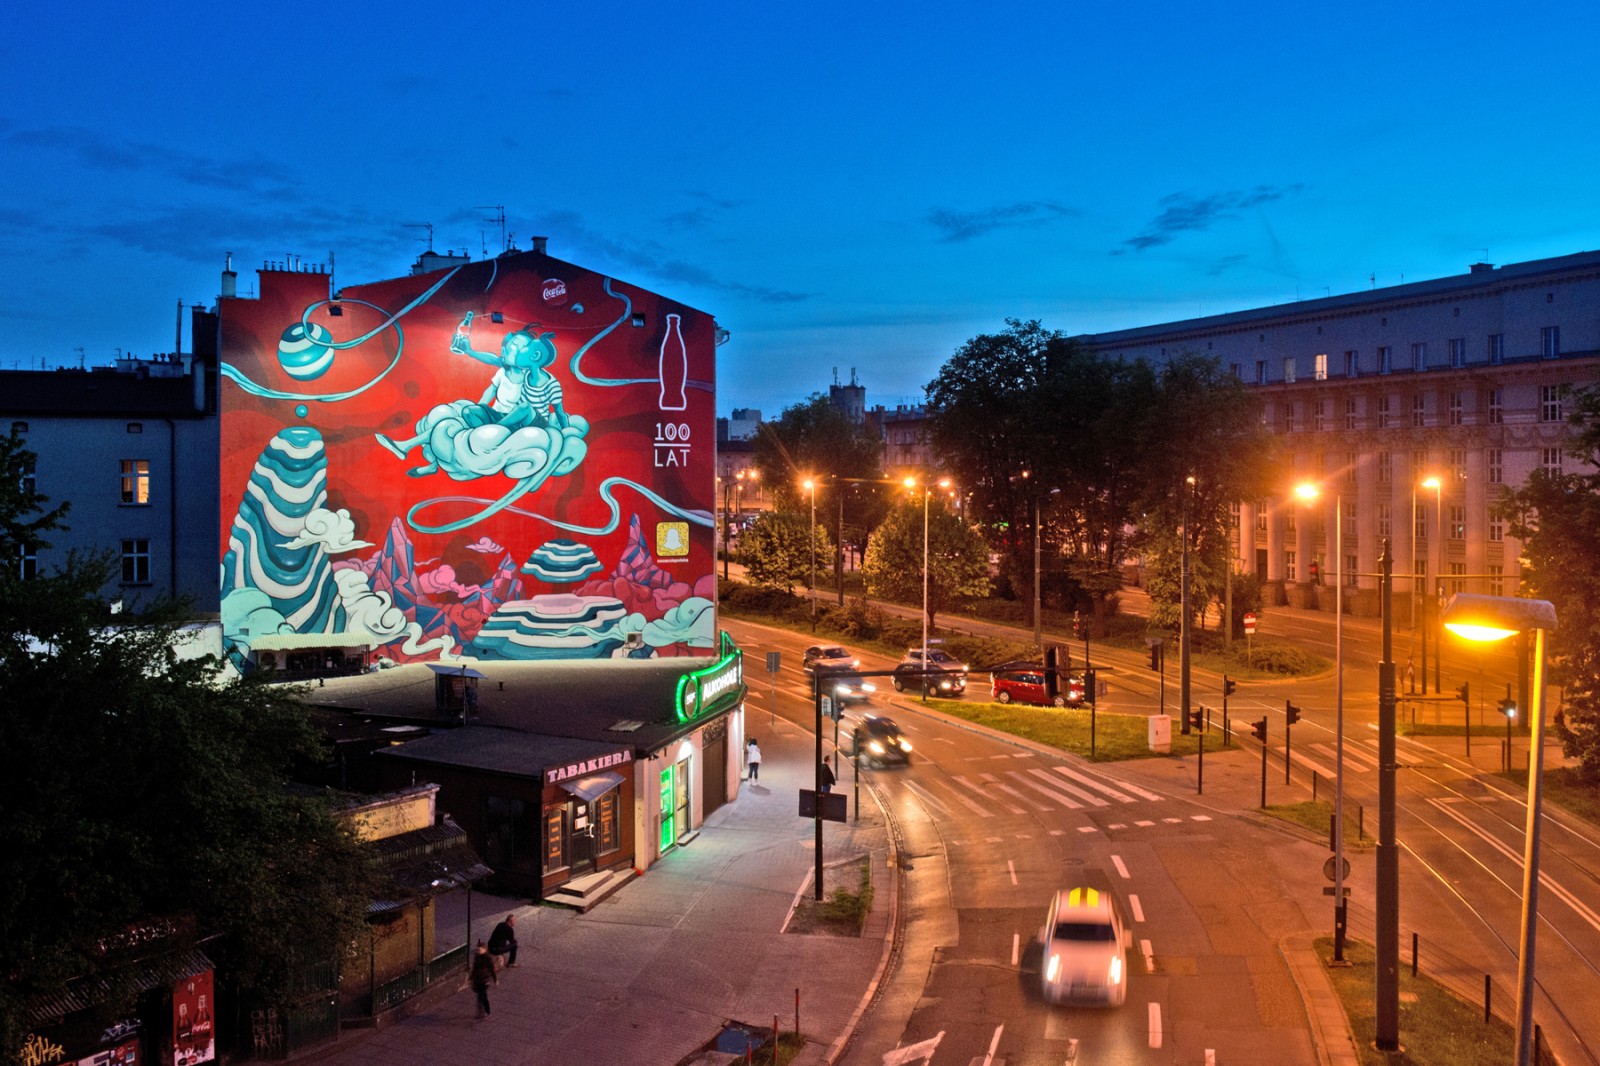 Coca Cola Poland mural in Cracow 100th anniversary of First Kiss | 100 years of Coca-Cola | Portfolio